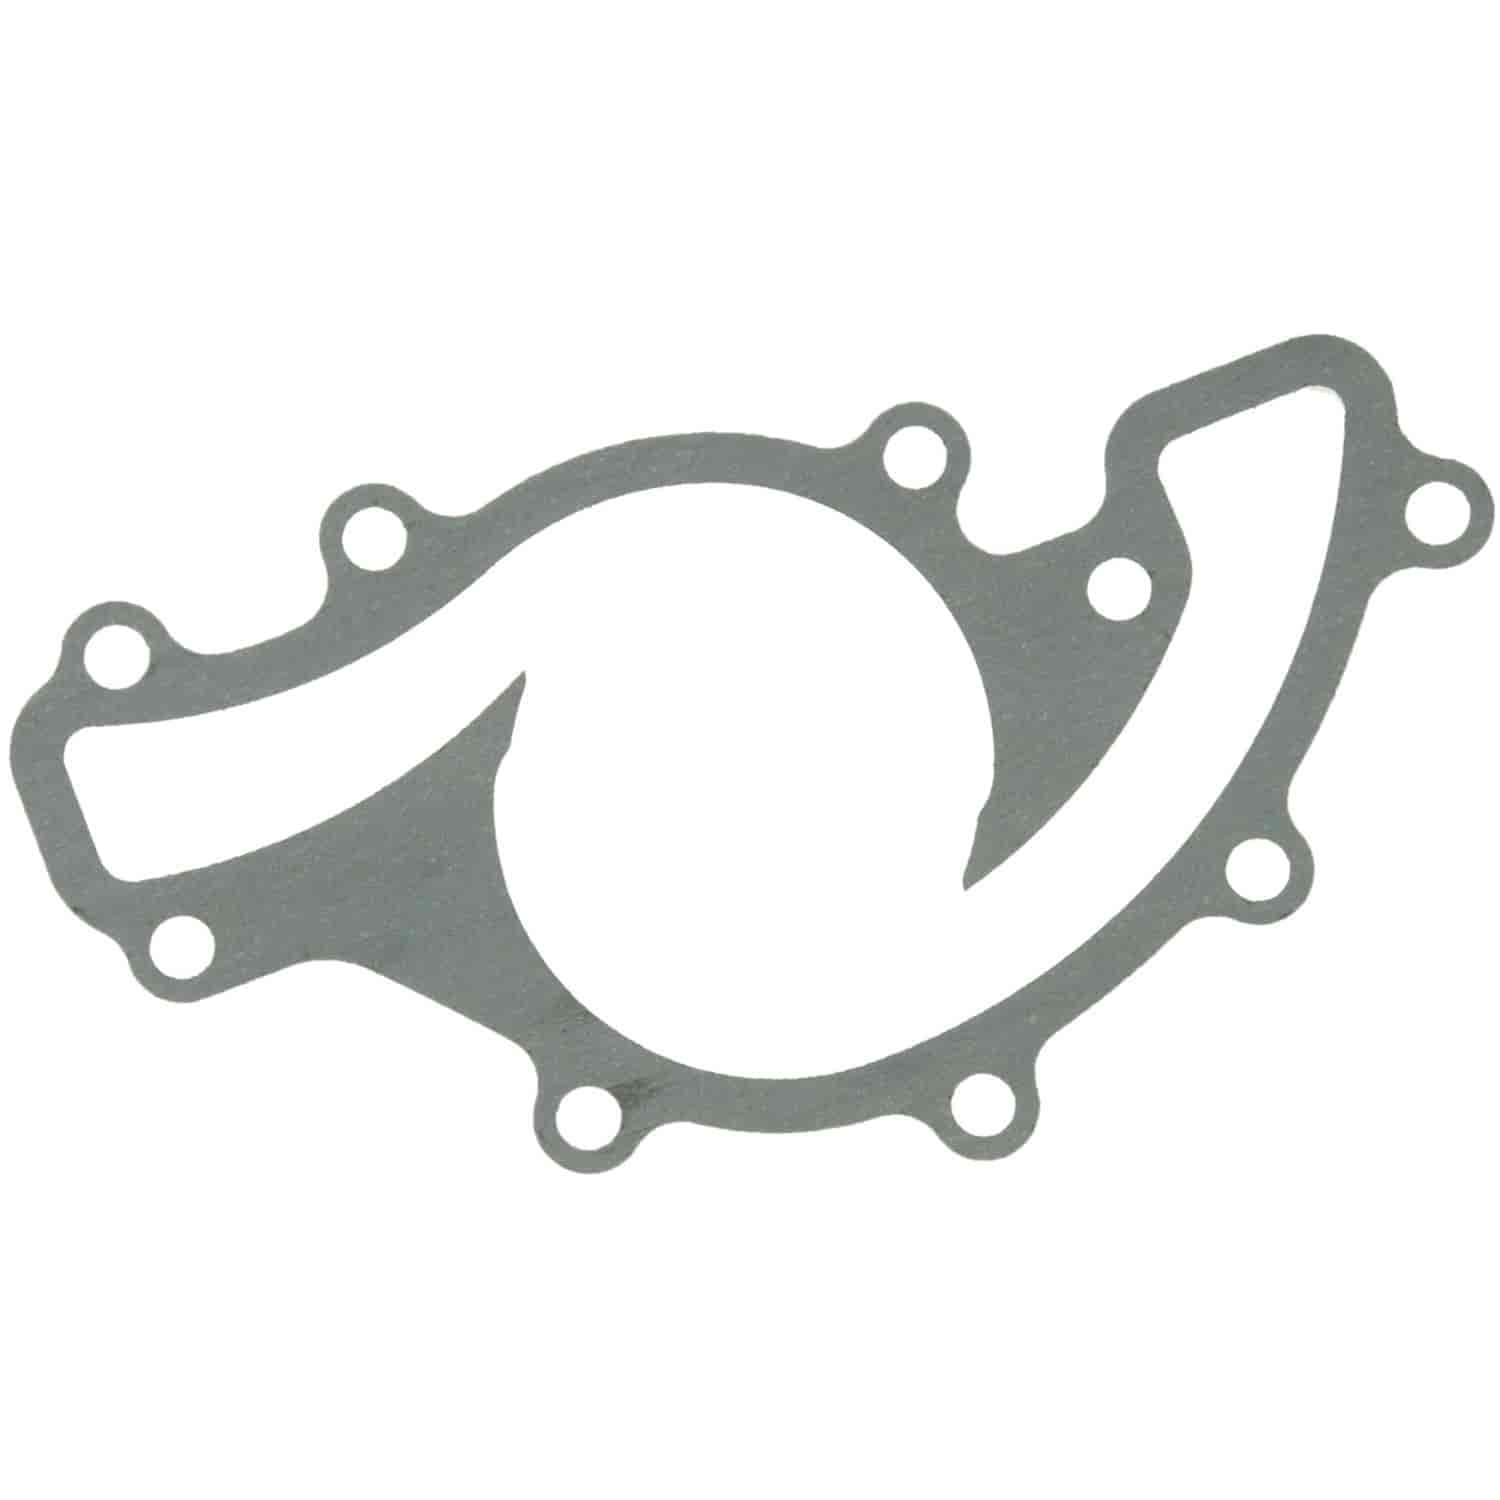 Water Pump Gasket Land Rover 3.9L 1993-1995 Range Rover Discovery I.